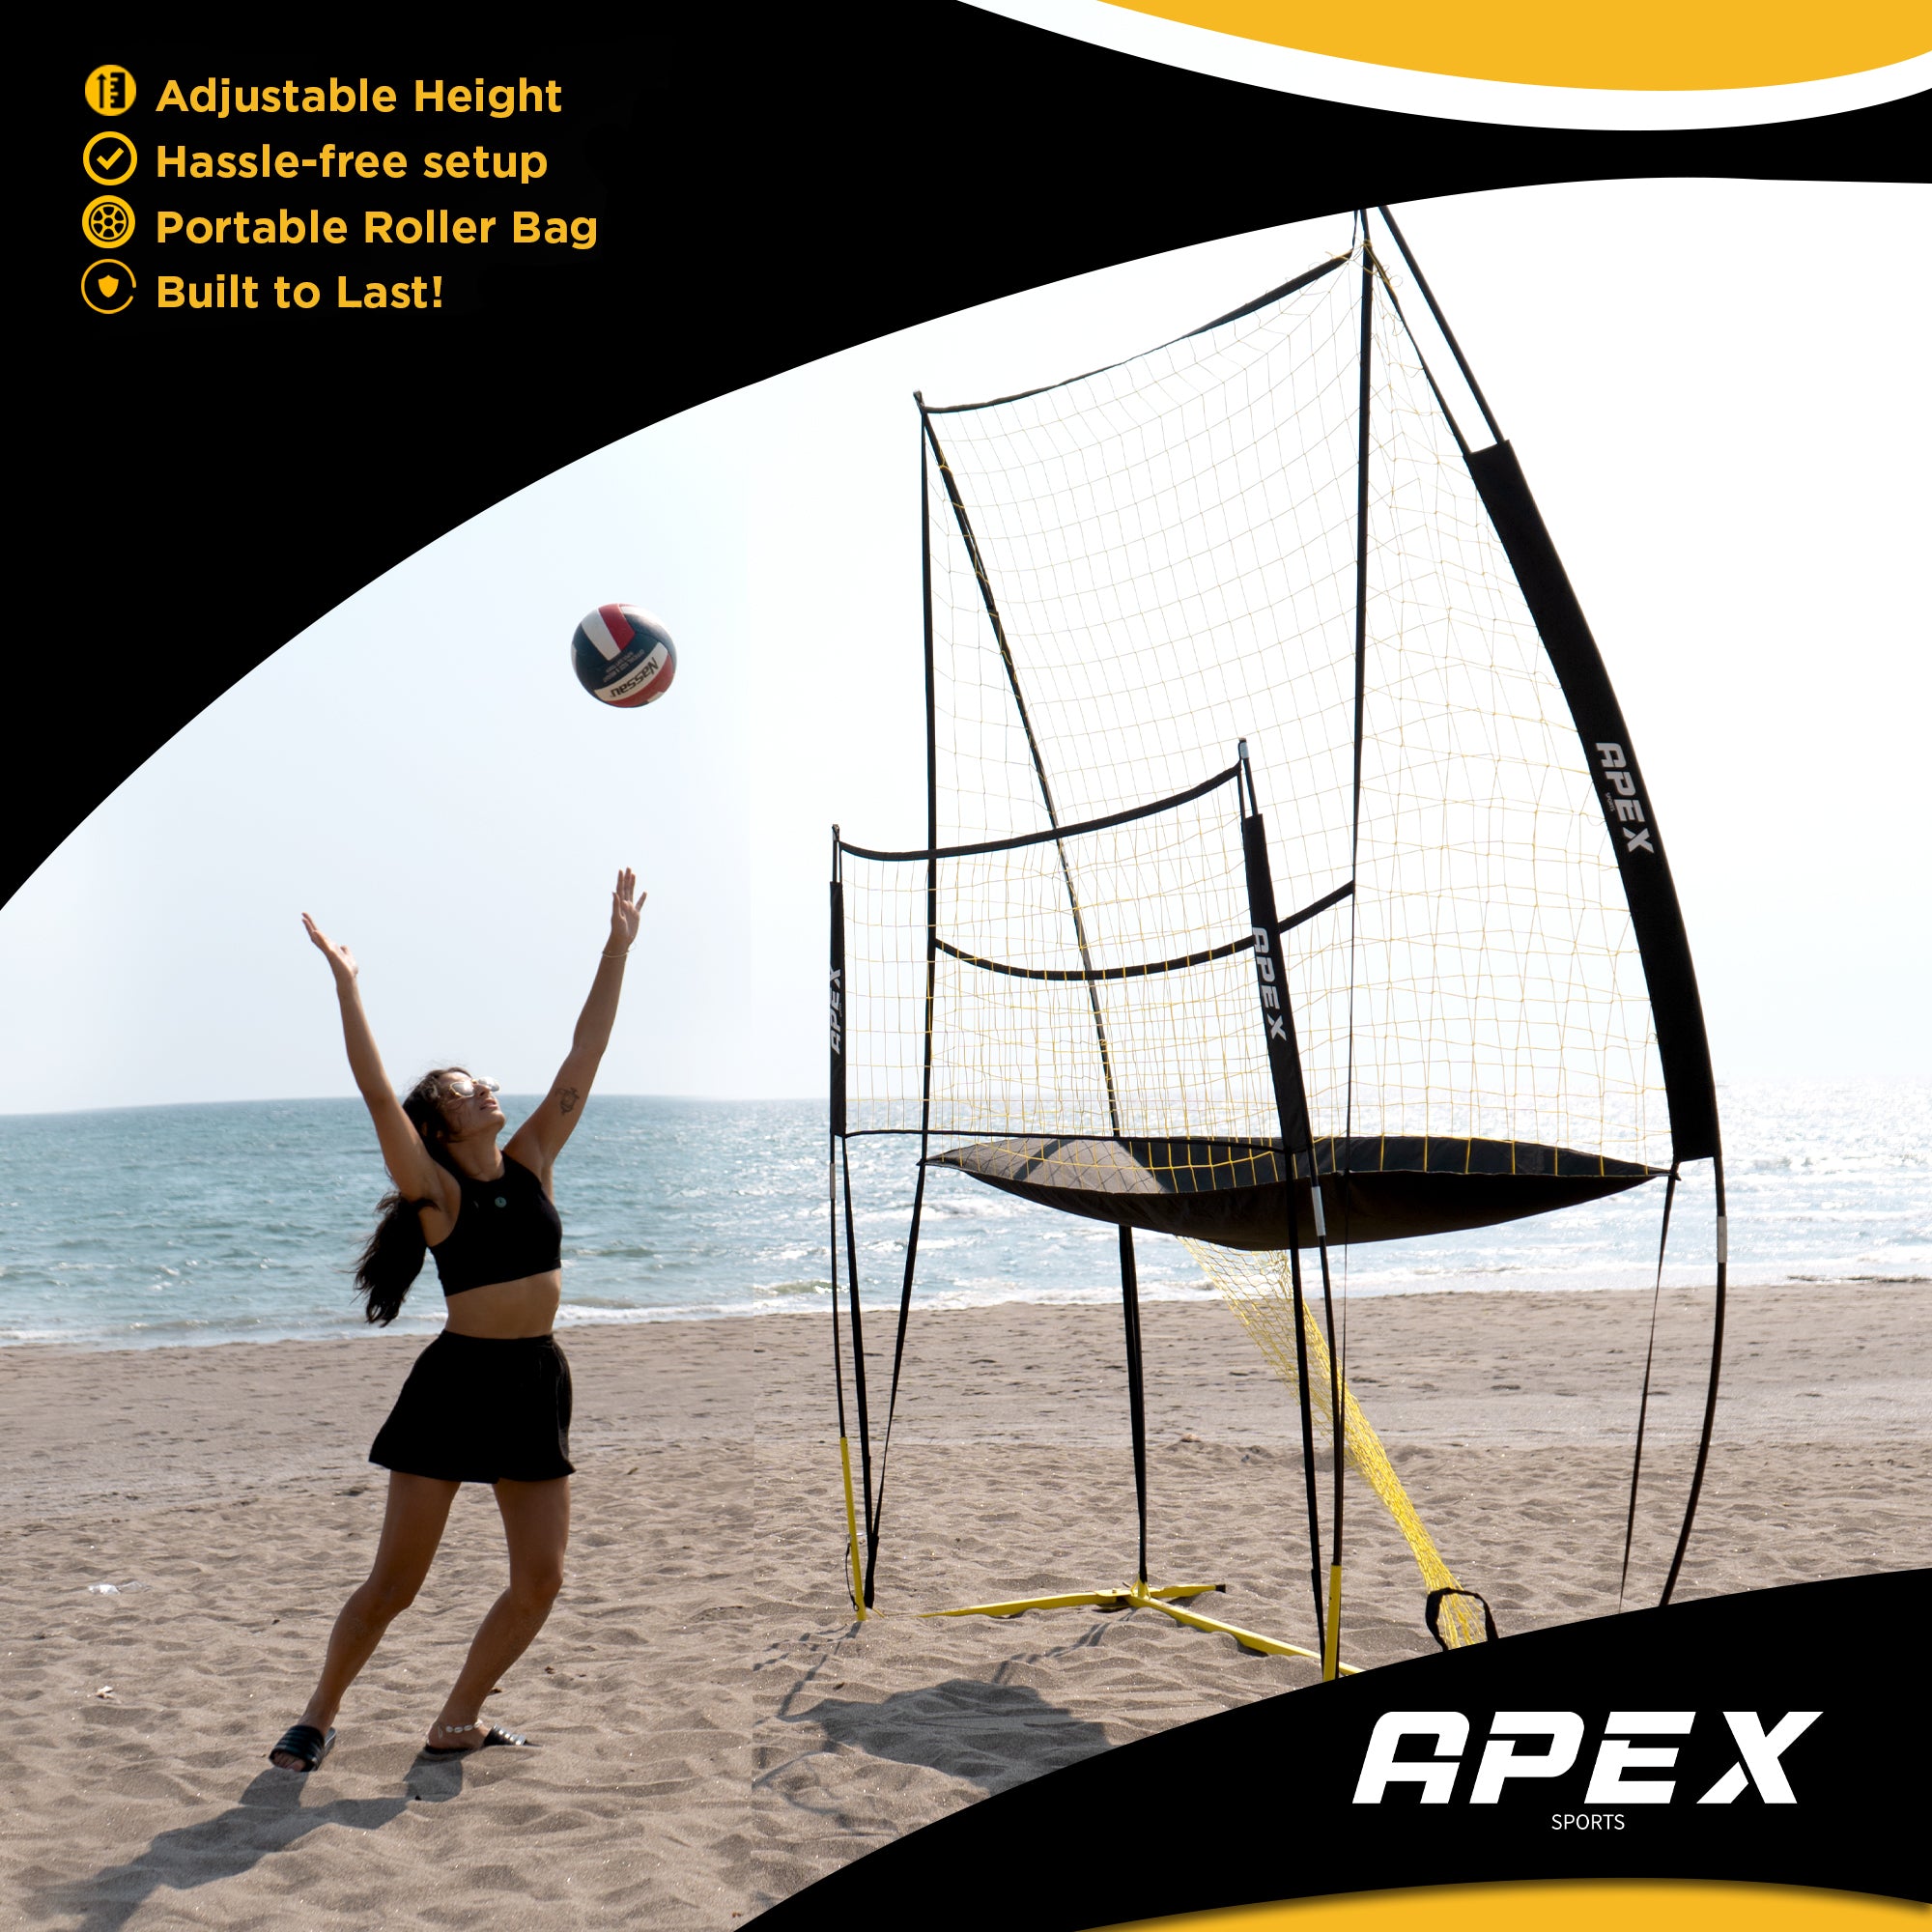 Apex Sports Volleyball Training Net System